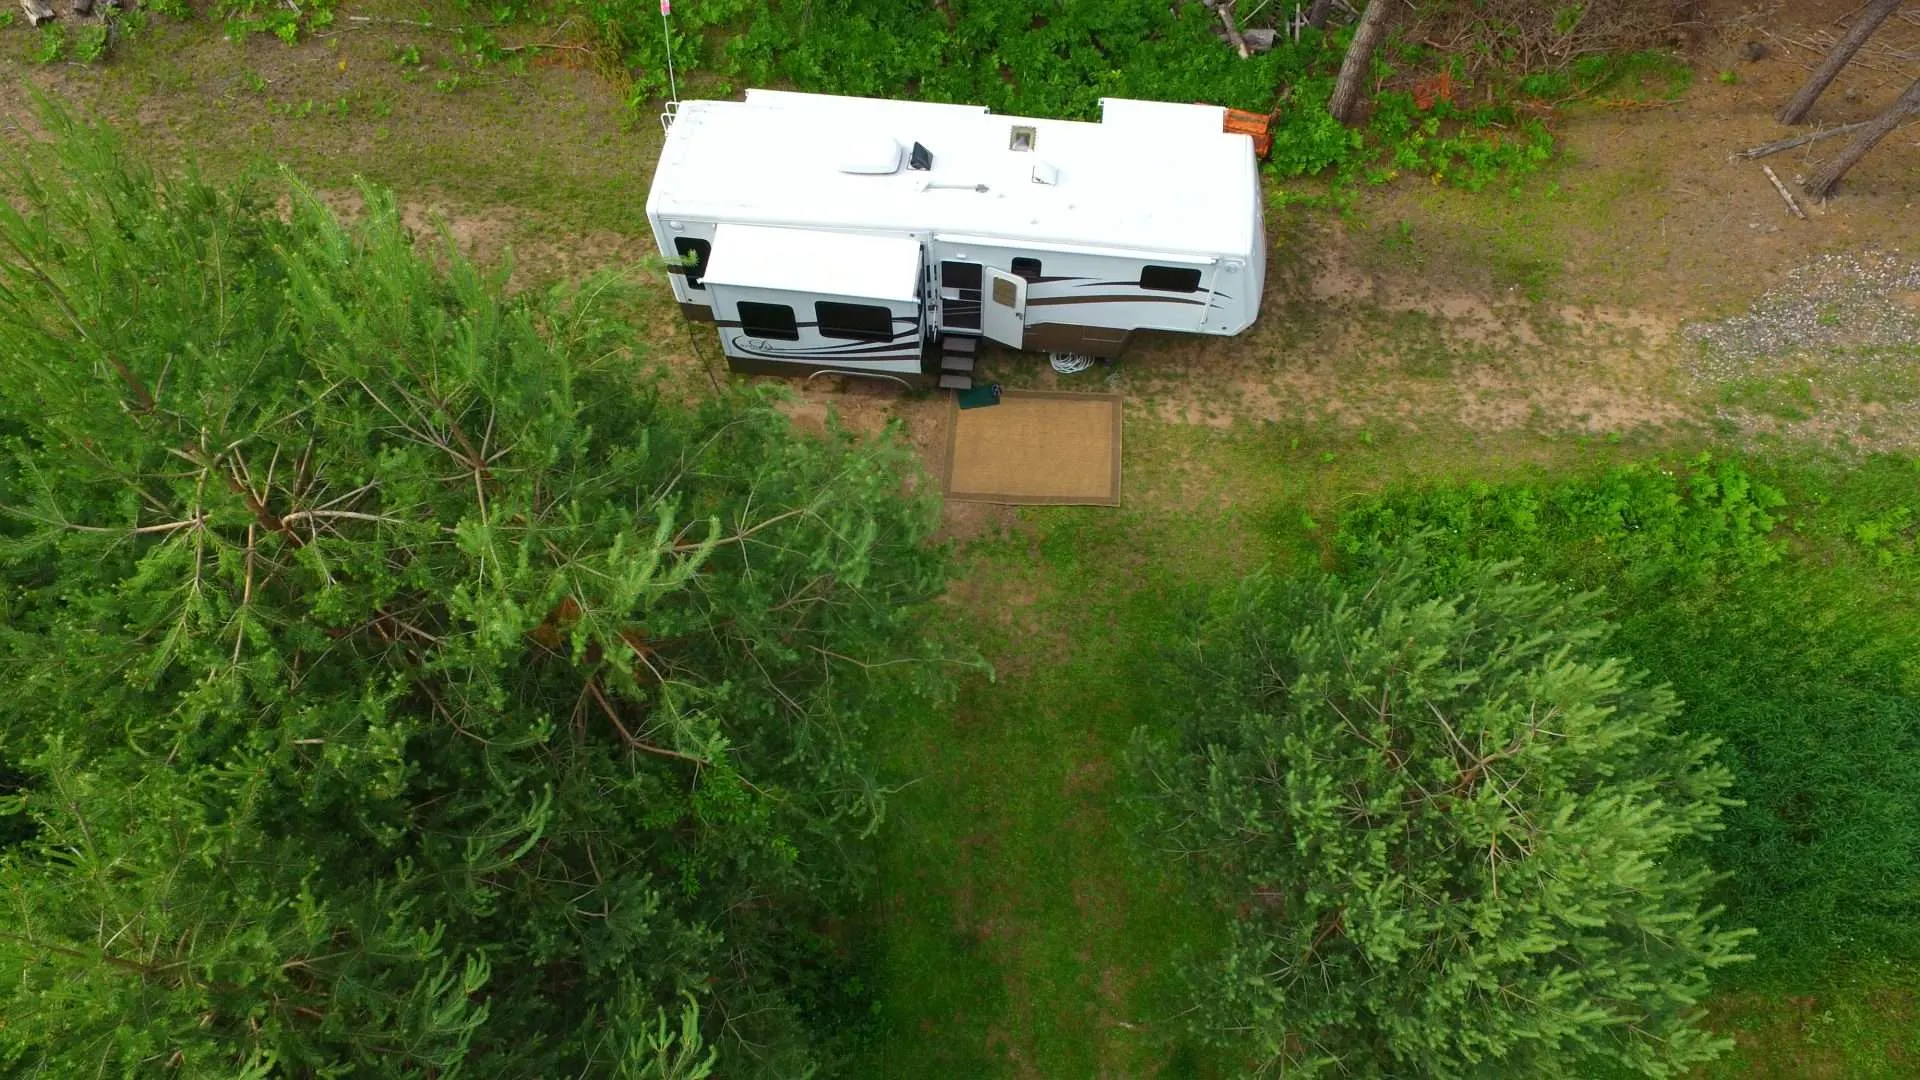 Aerial view of parked RV